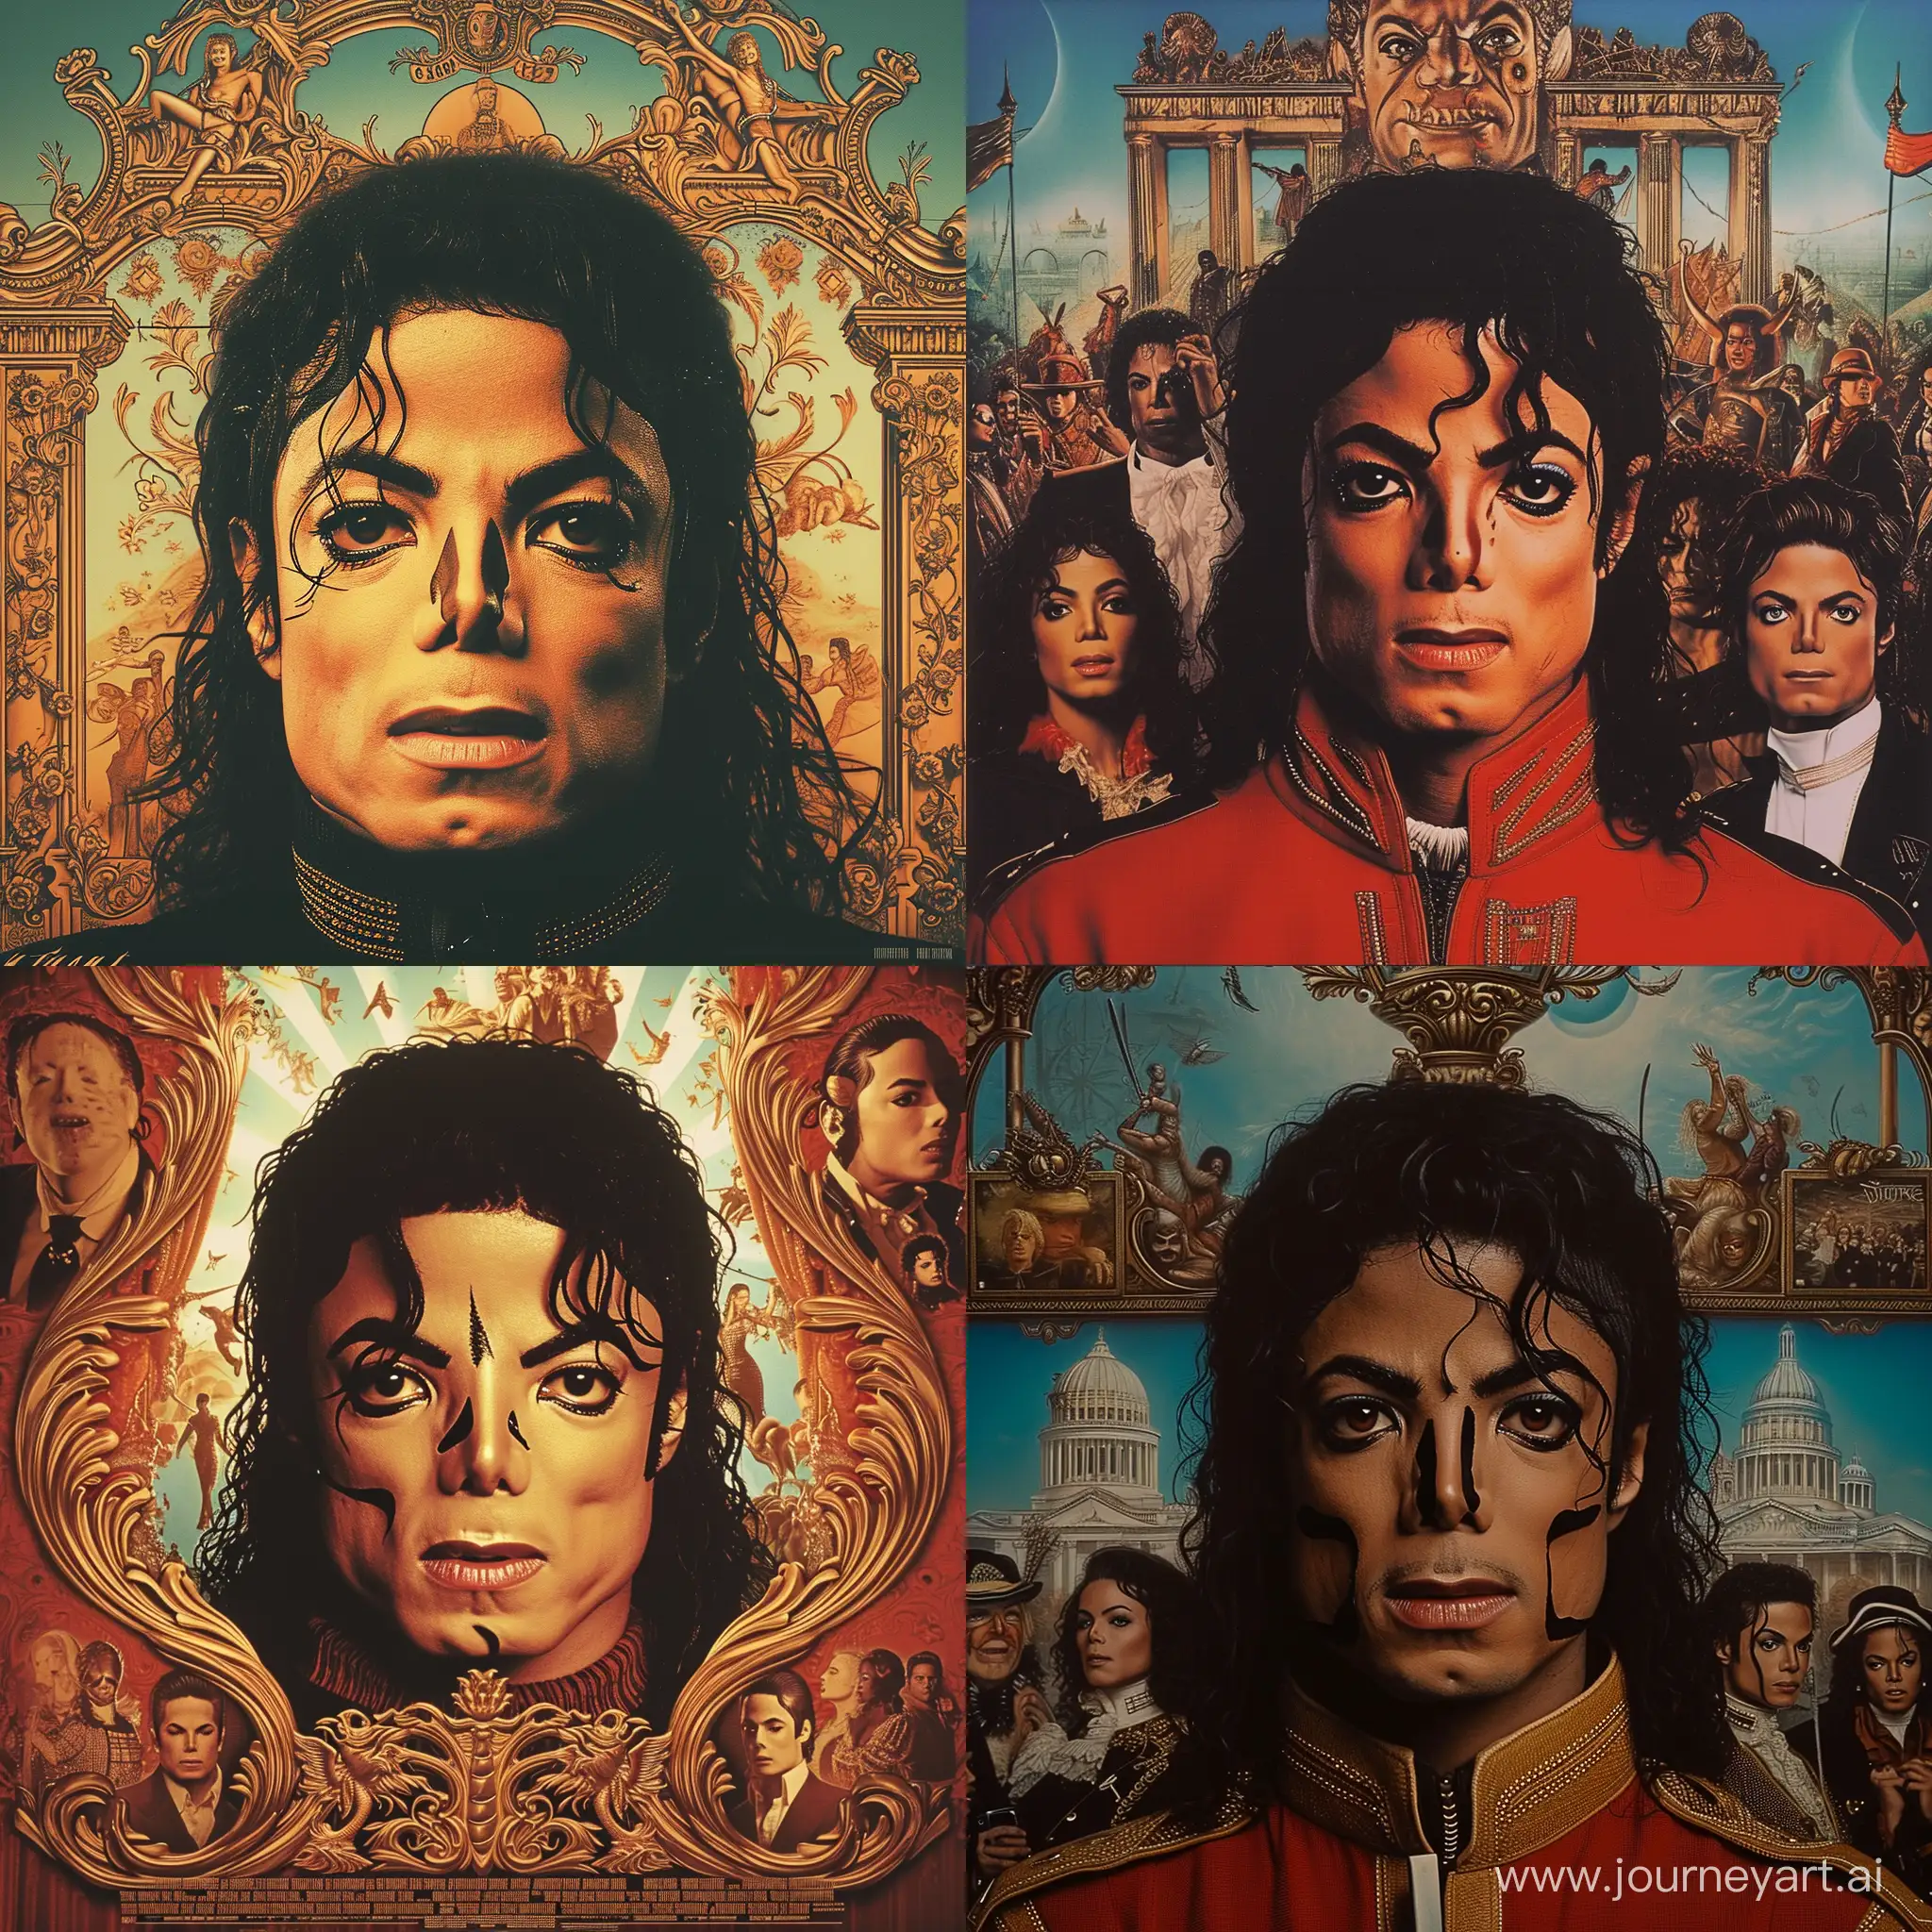 Michael-Jackson-Tribute-Film-Poster-Iconic-Portrayal-in-Square-Format